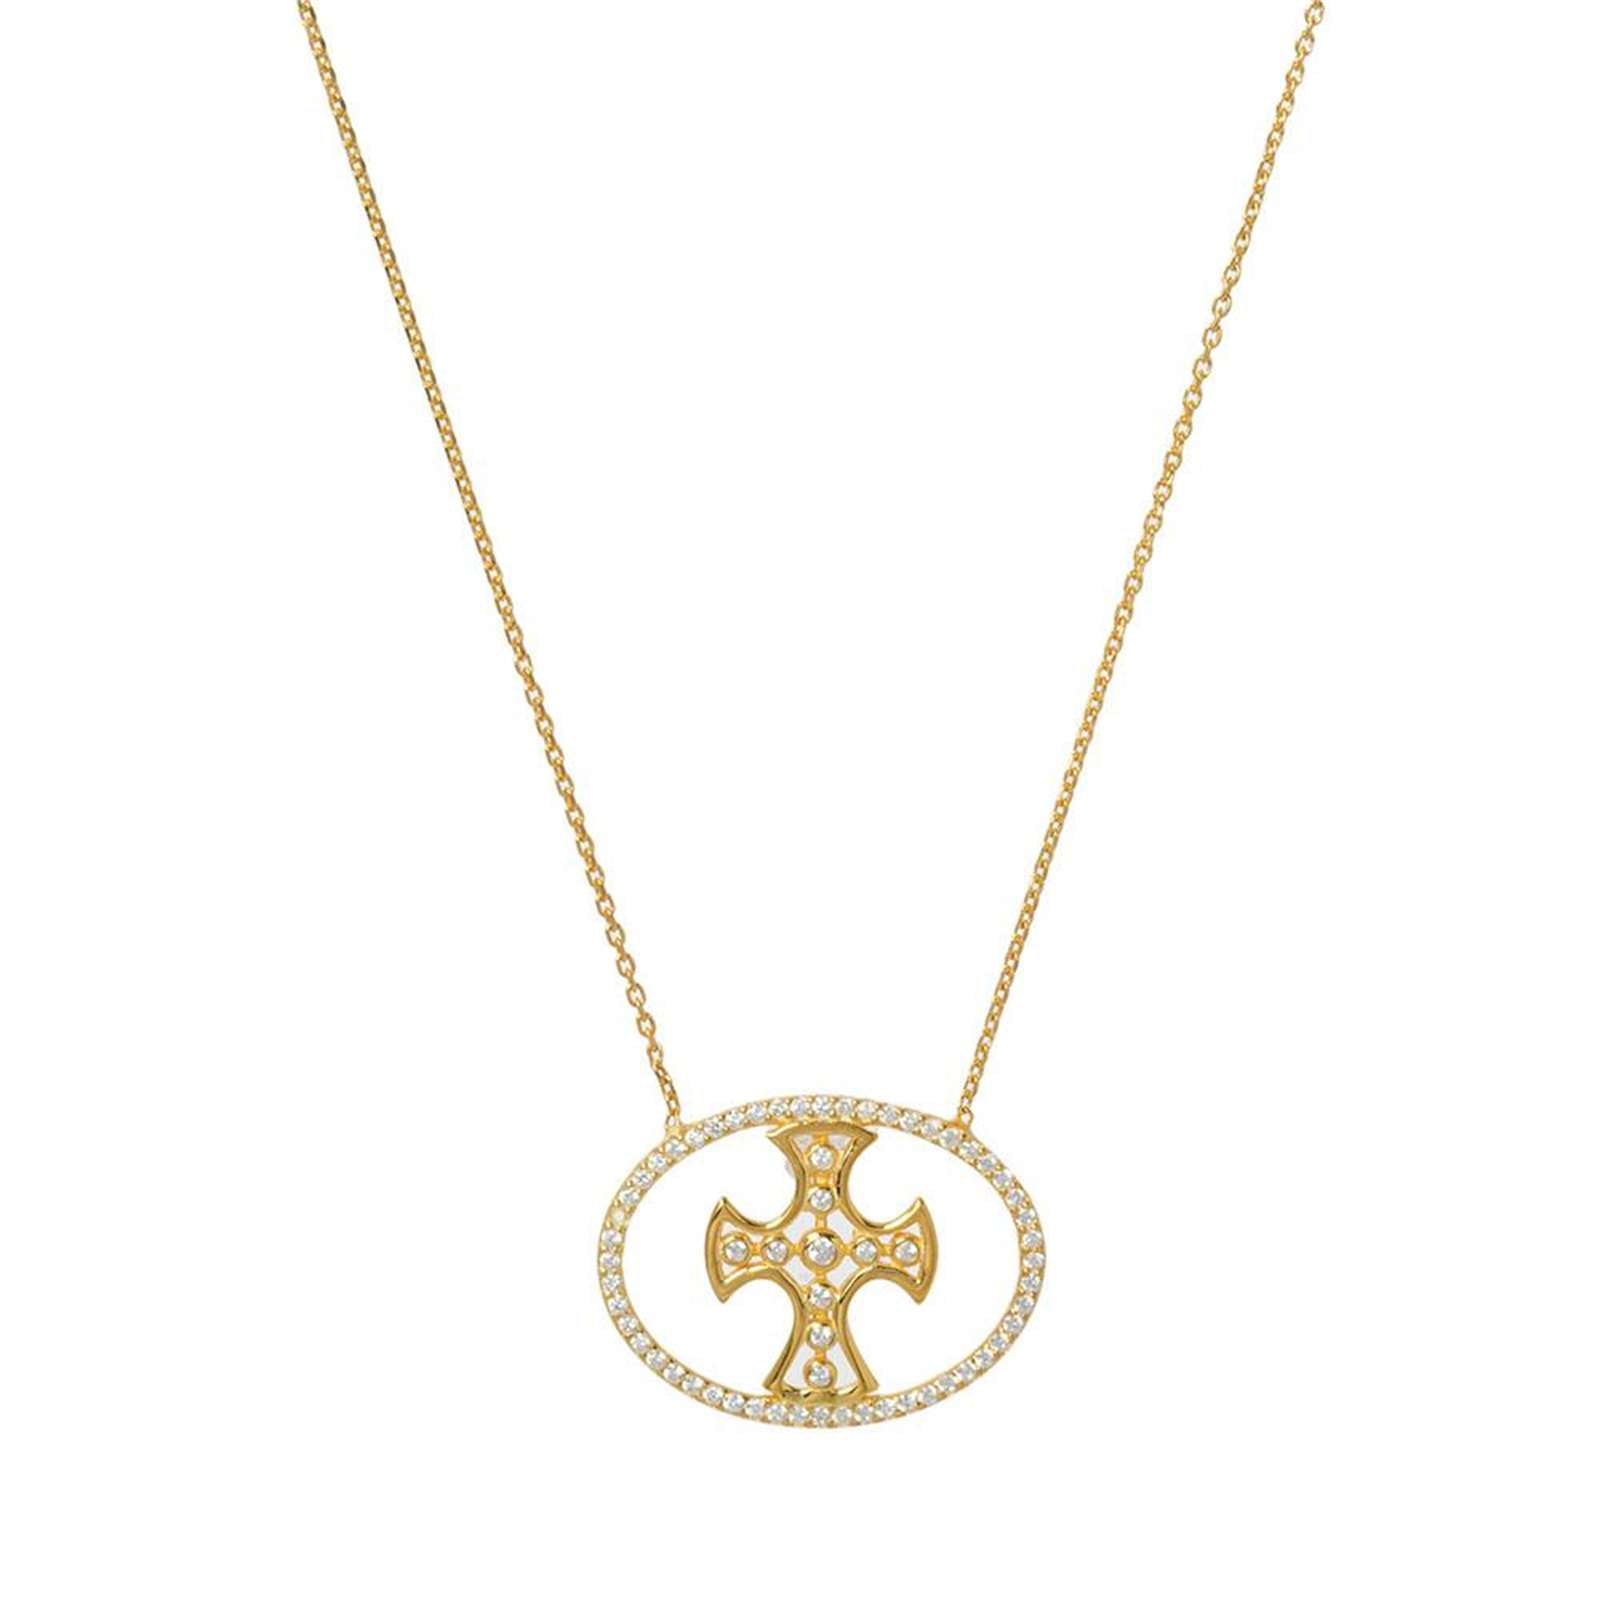 Athra Women Oval Cross Necklace With Extension